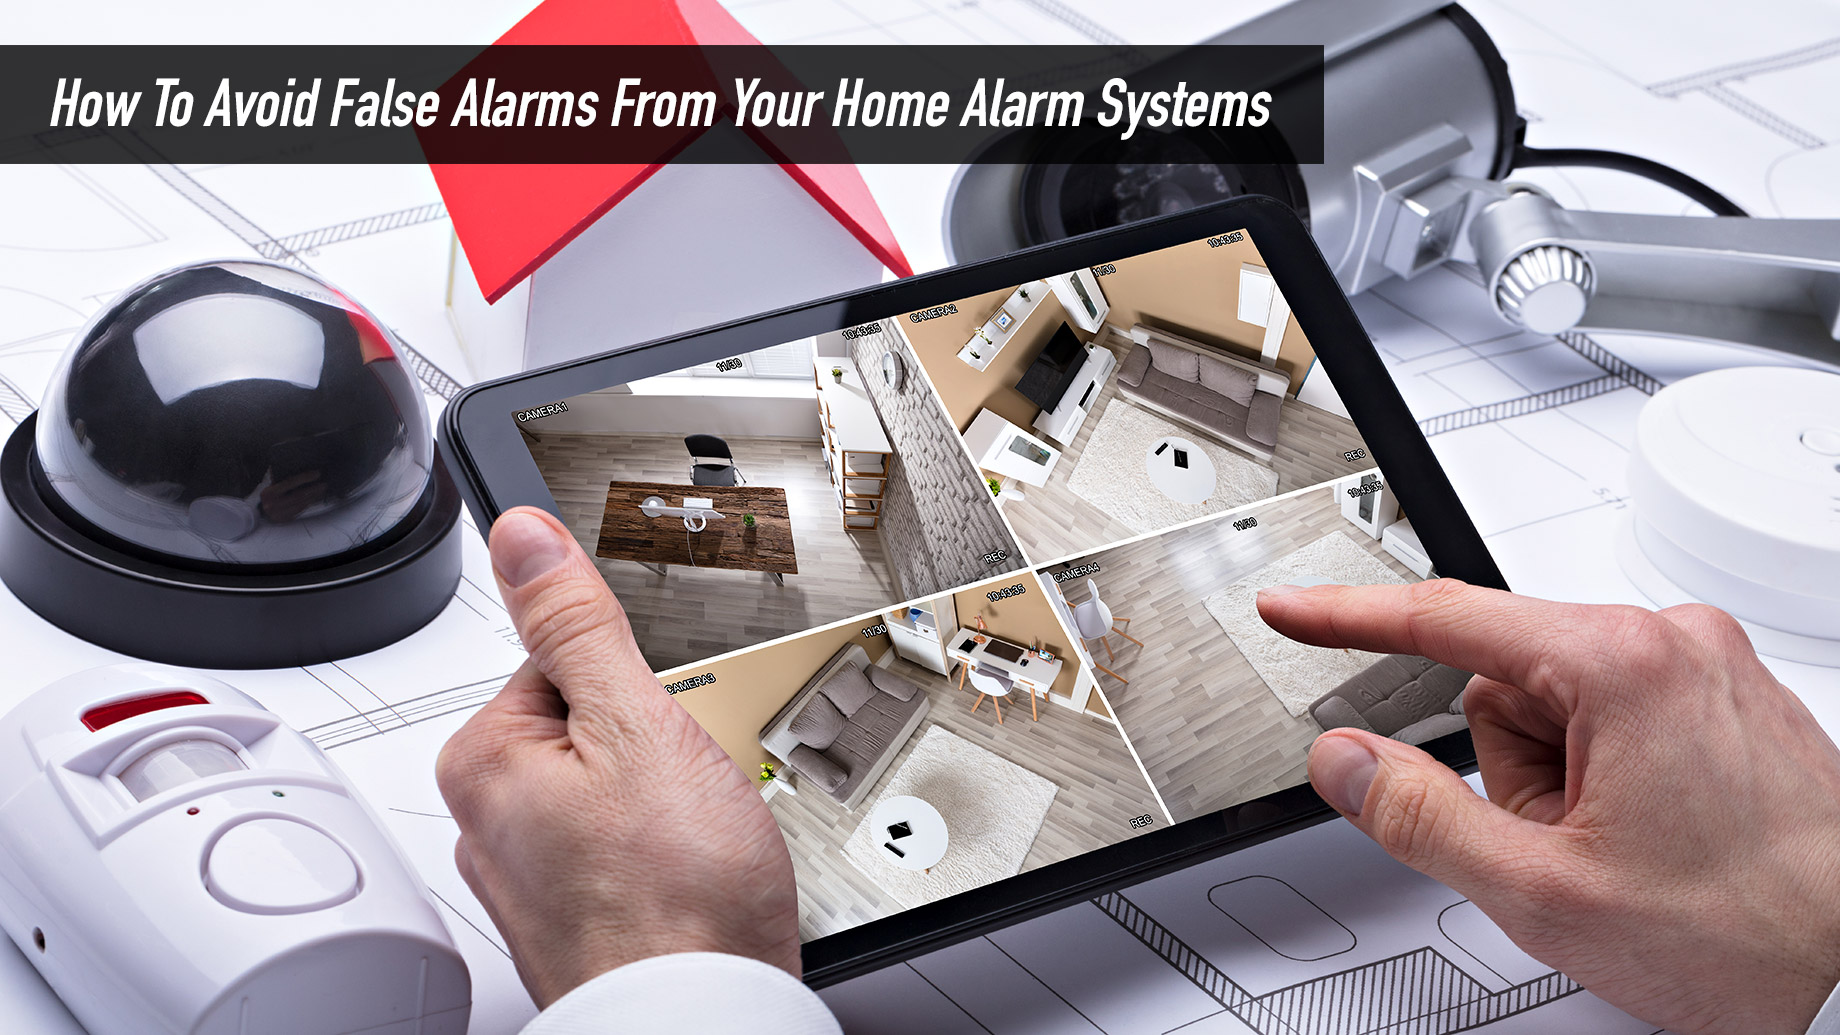 How To Avoid False Alarms From Your Home Alarm Systems